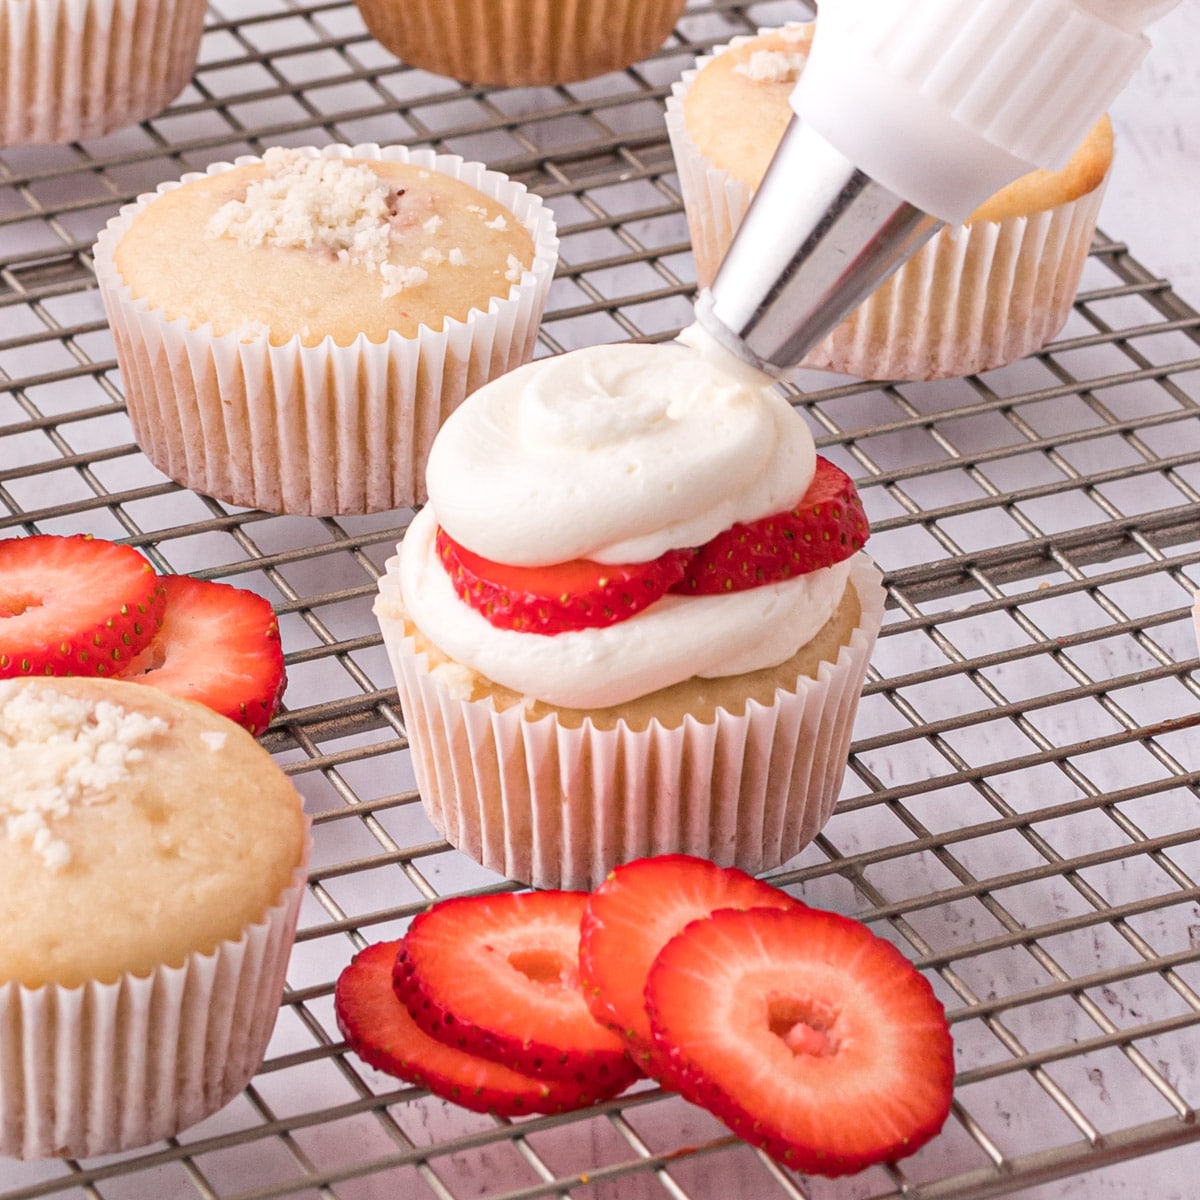 piping whipped frosting on strawberry shortcake cupcakes